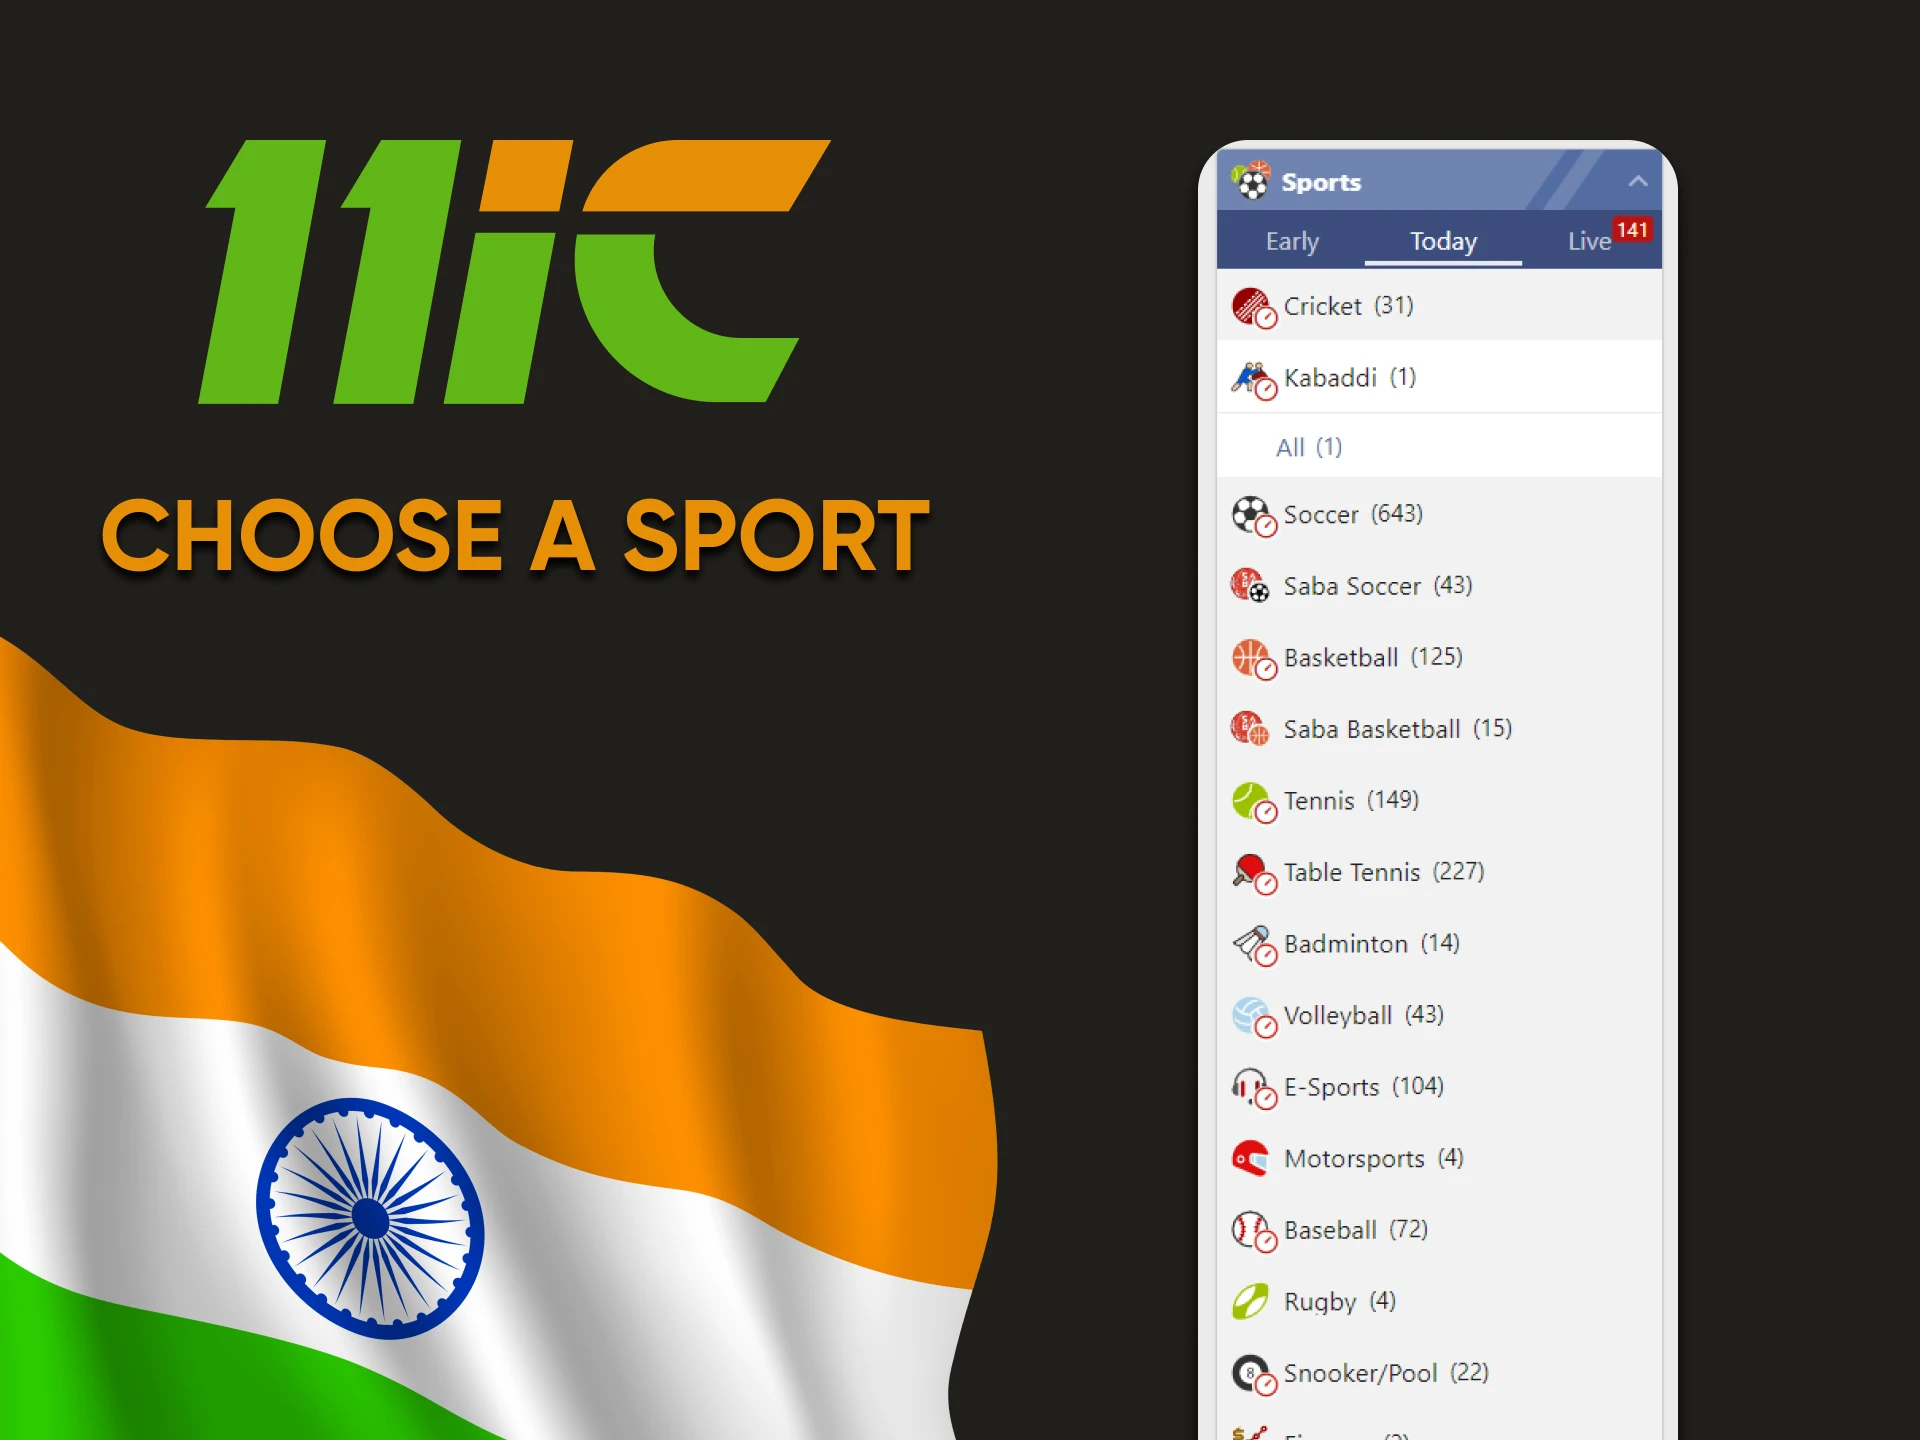 Find the sport you want to bet on on 11ic.